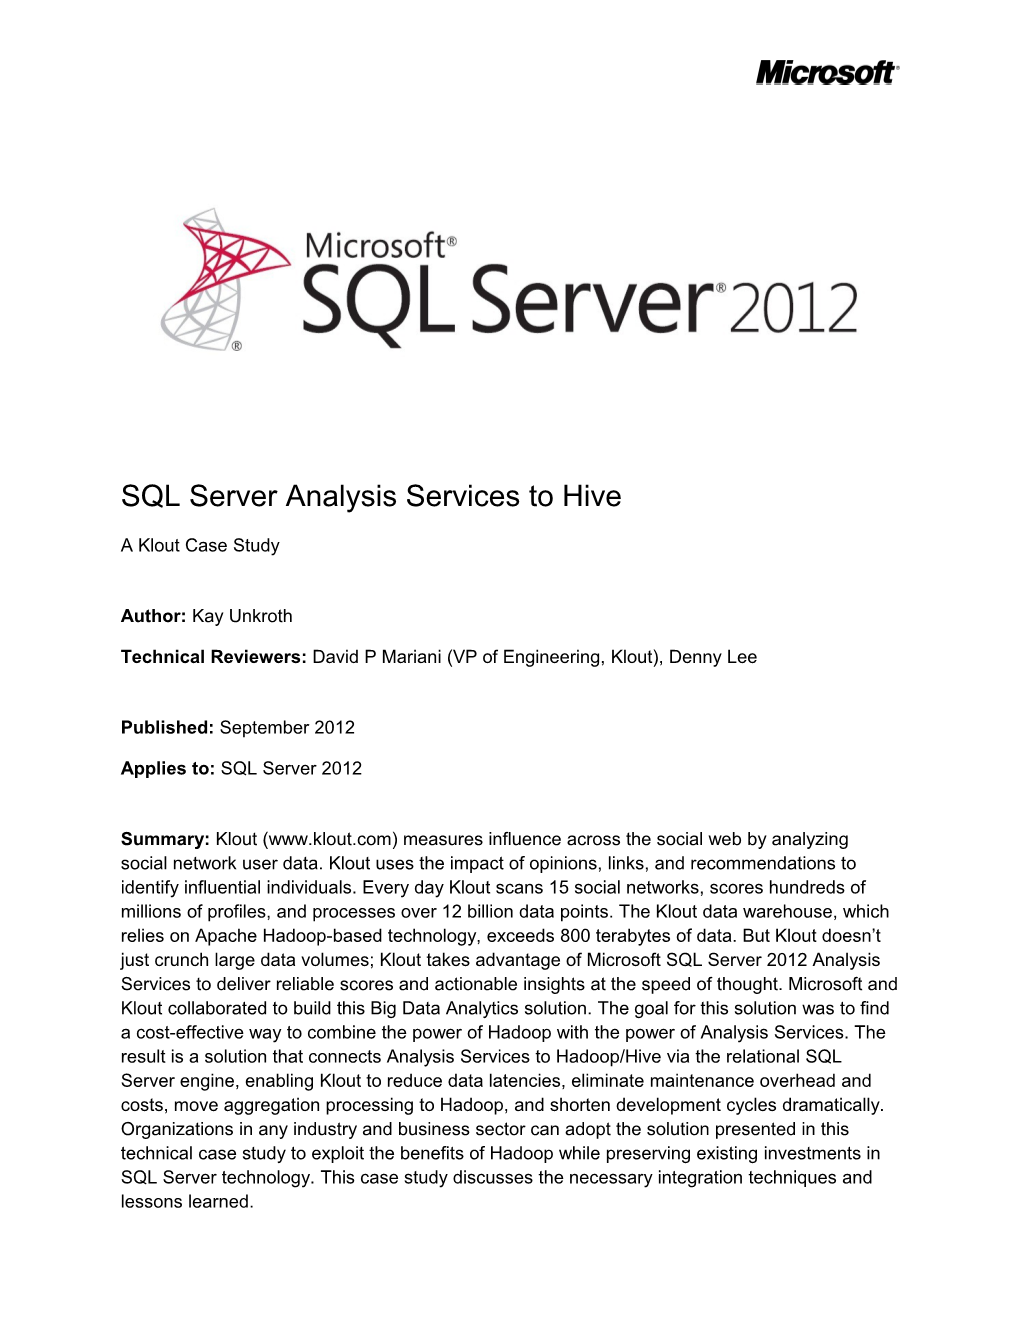 SQL Server Analysis Services to Hive